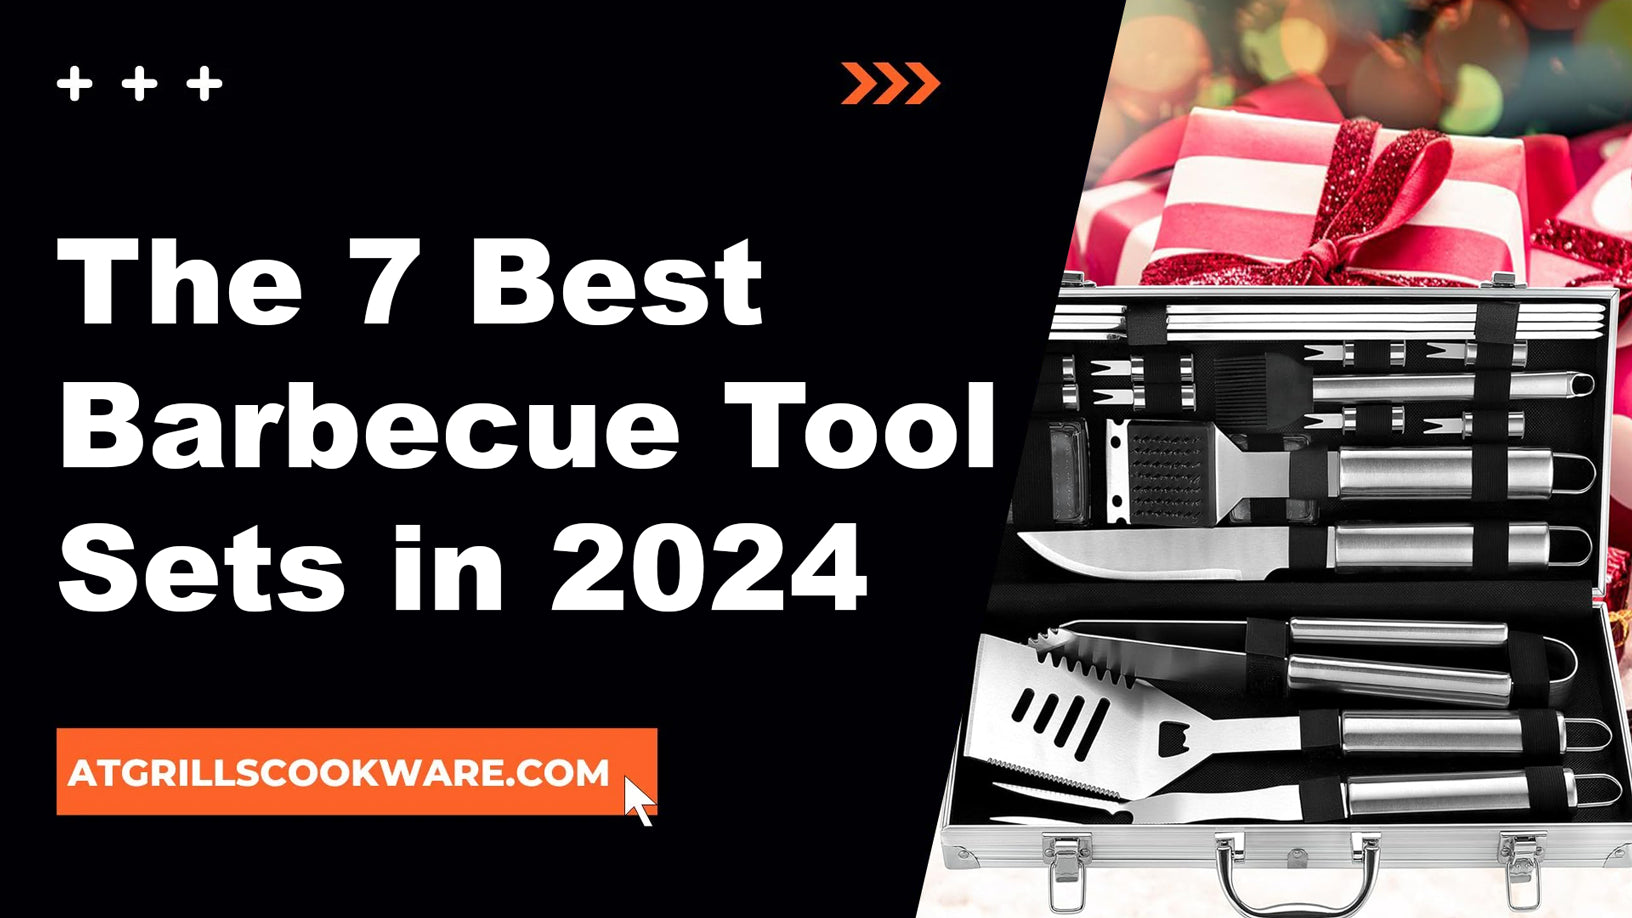 The 7 Best Barbecue Tool Sets in 2024